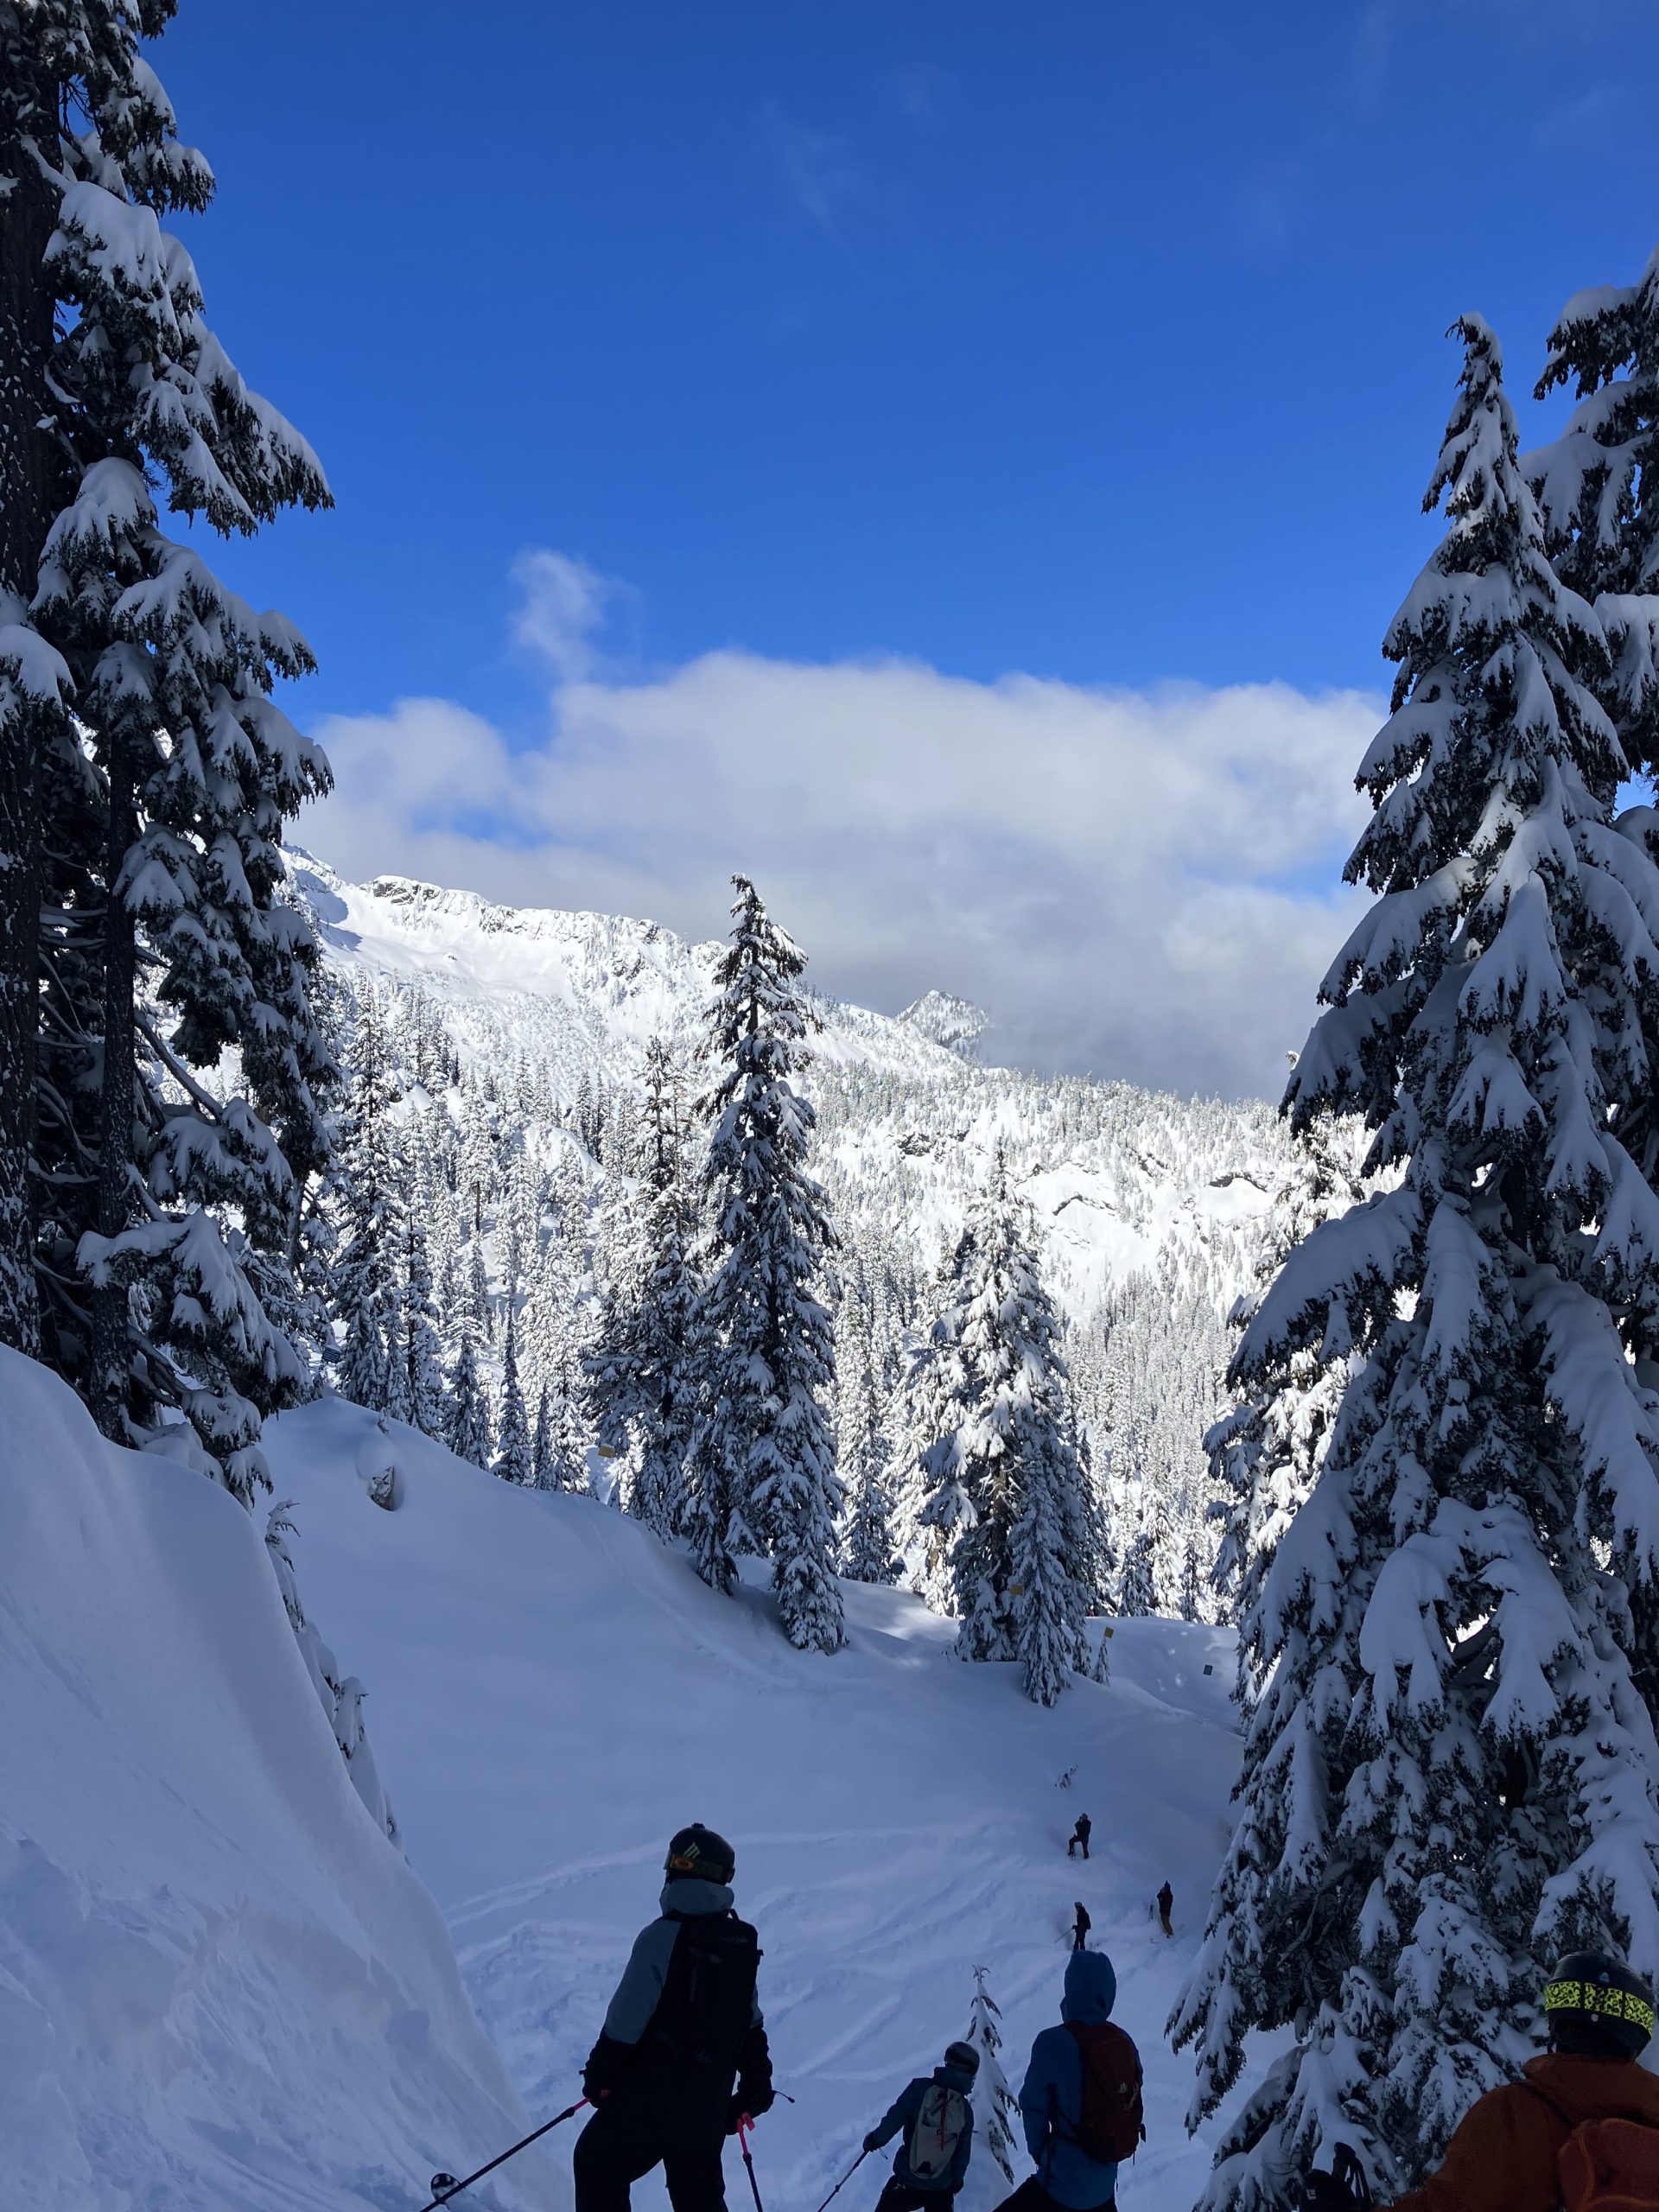 People examining a drop in the Nash Gate sidecountry, Alpental, summit at Snoqualmie, Washington